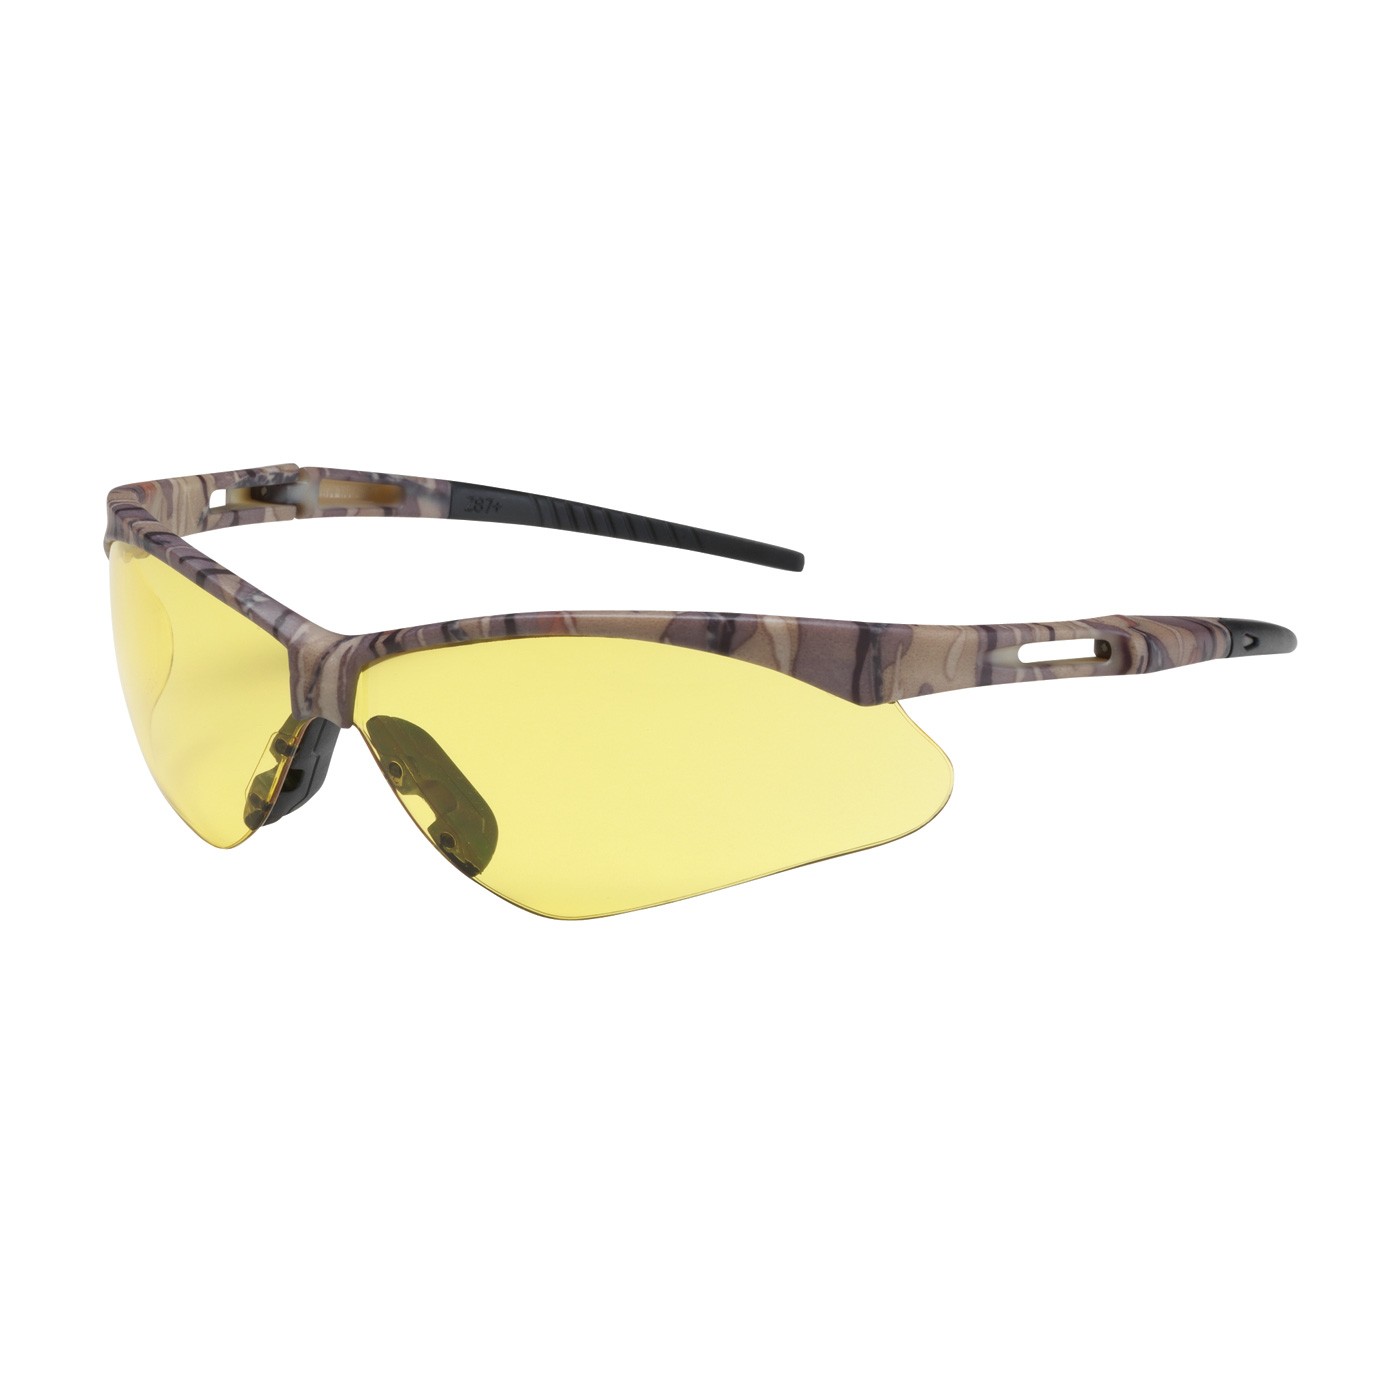 Anser™ Semi-Rimless Safety Glasses with Camouflage Frame, Amber Lens and Anti-Scratch / Anti-Fog Coating  (#250-AN-10127)